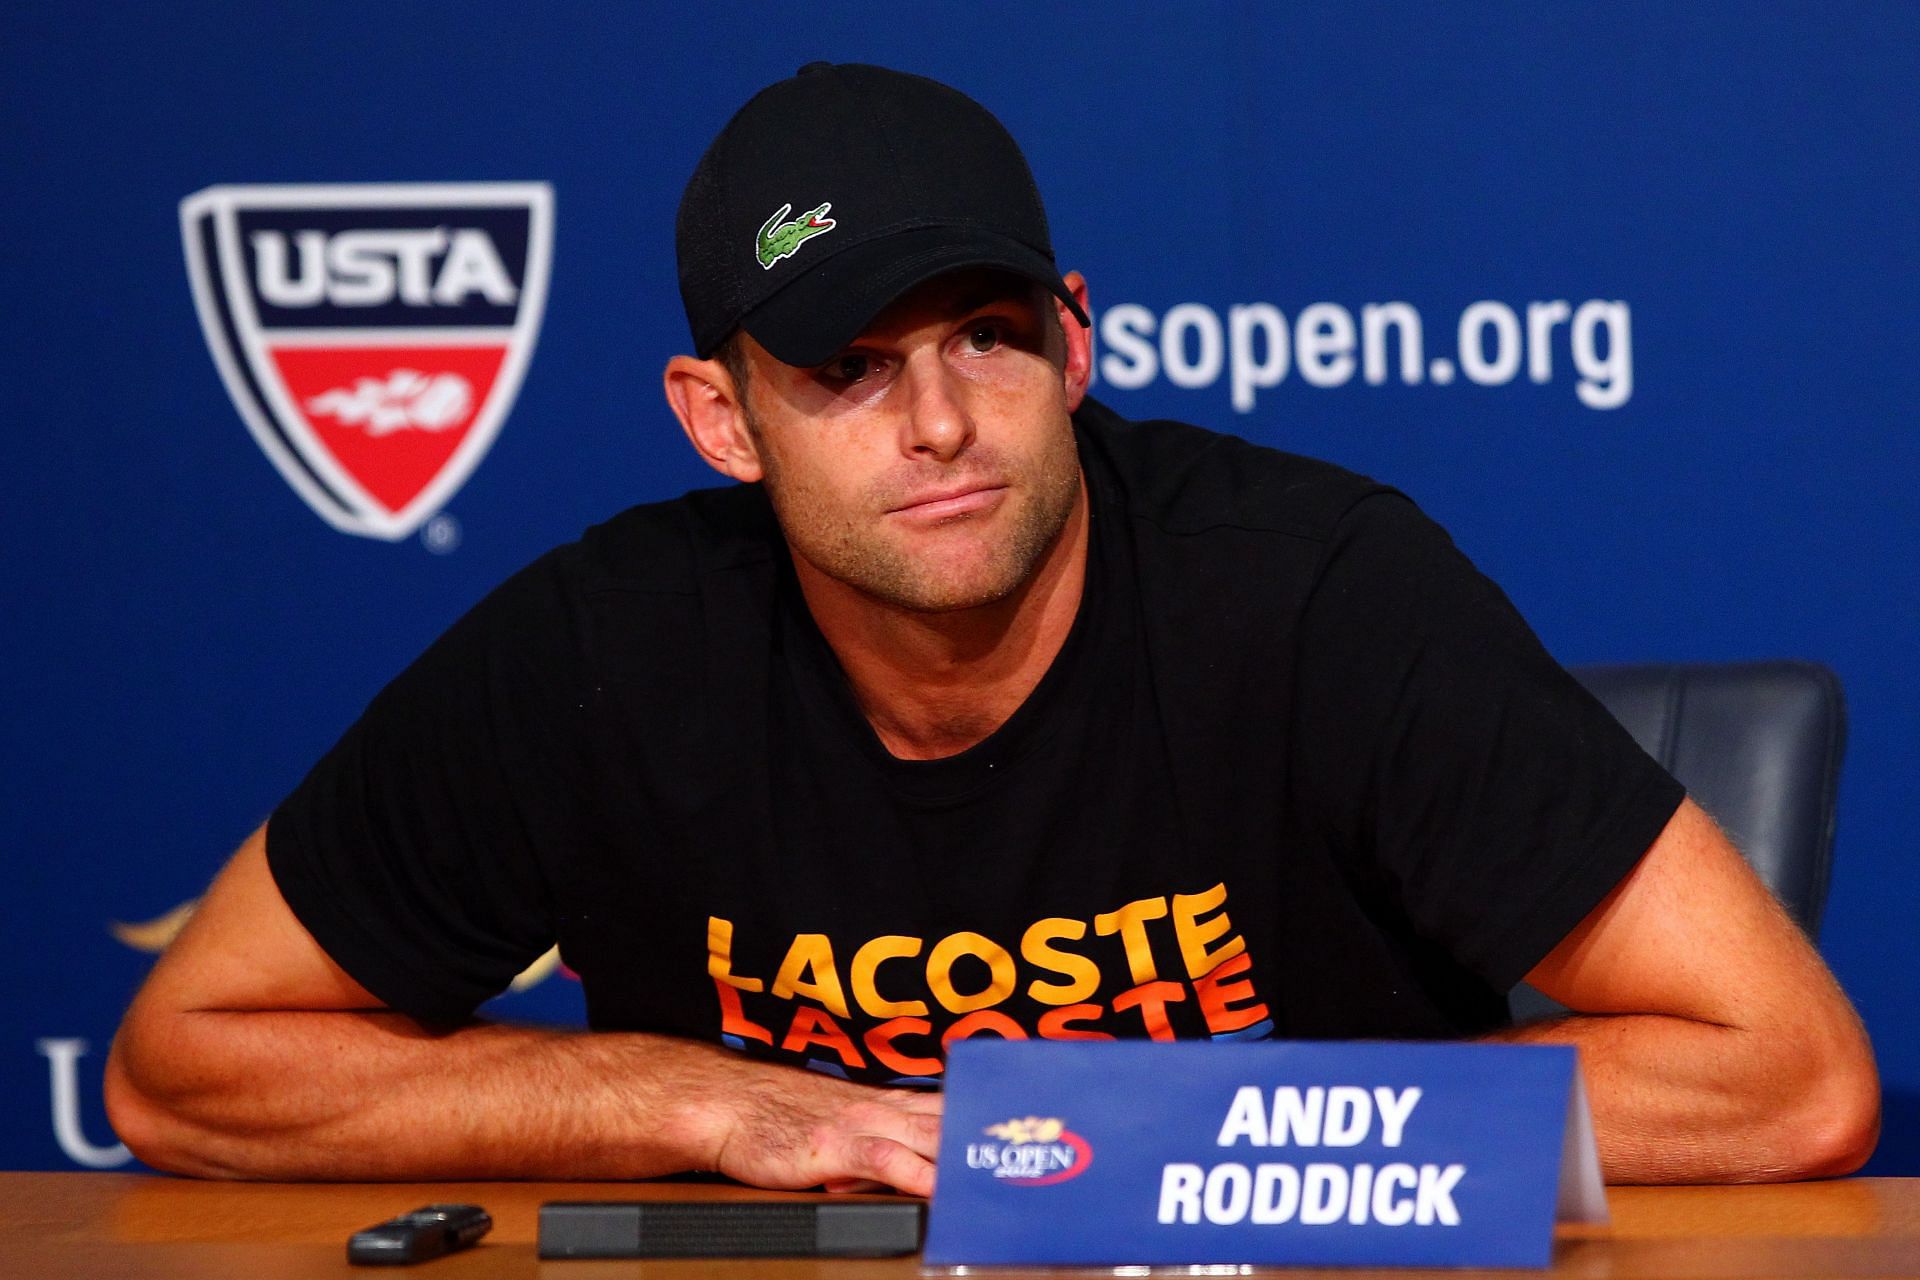 Andy Roddick at the 2012 US Open where he announced his retirement